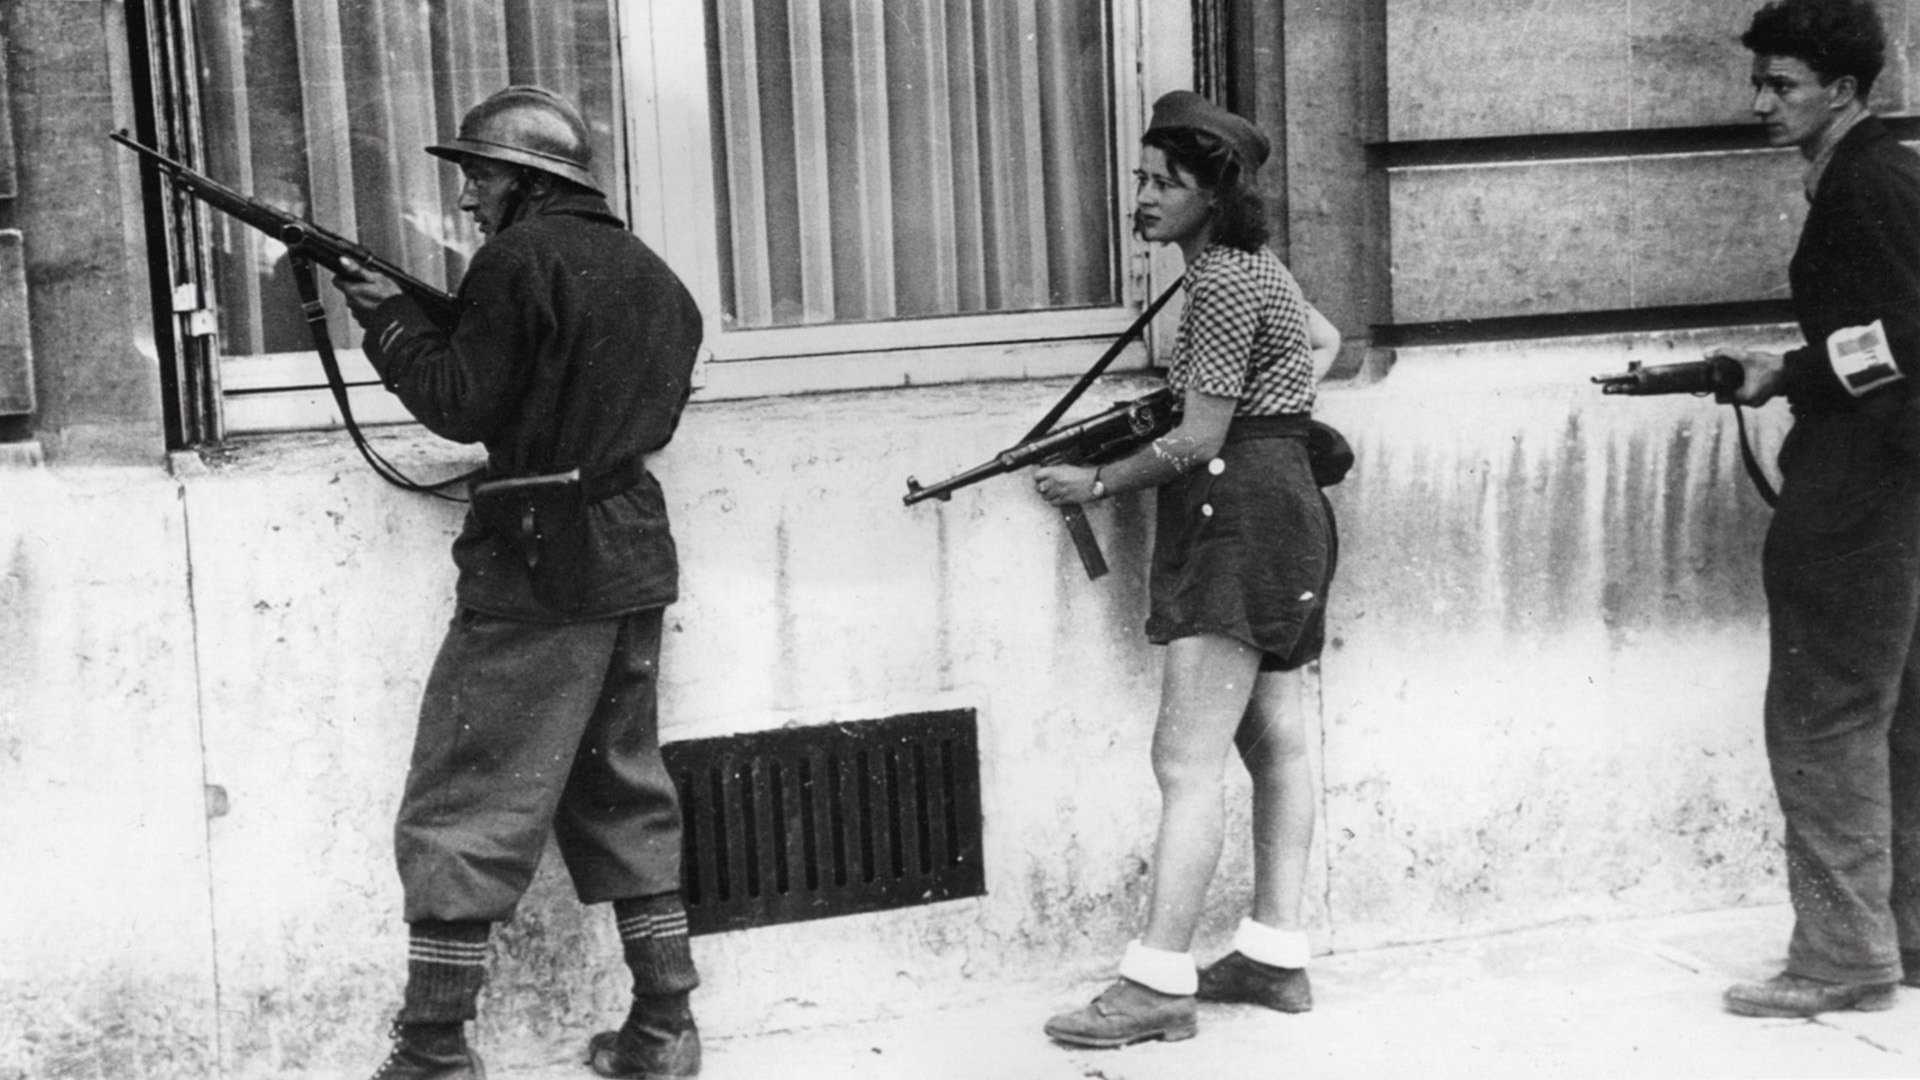 A young French woman carries a captured German weapon and moves with a comrade alongside a building in Paris.